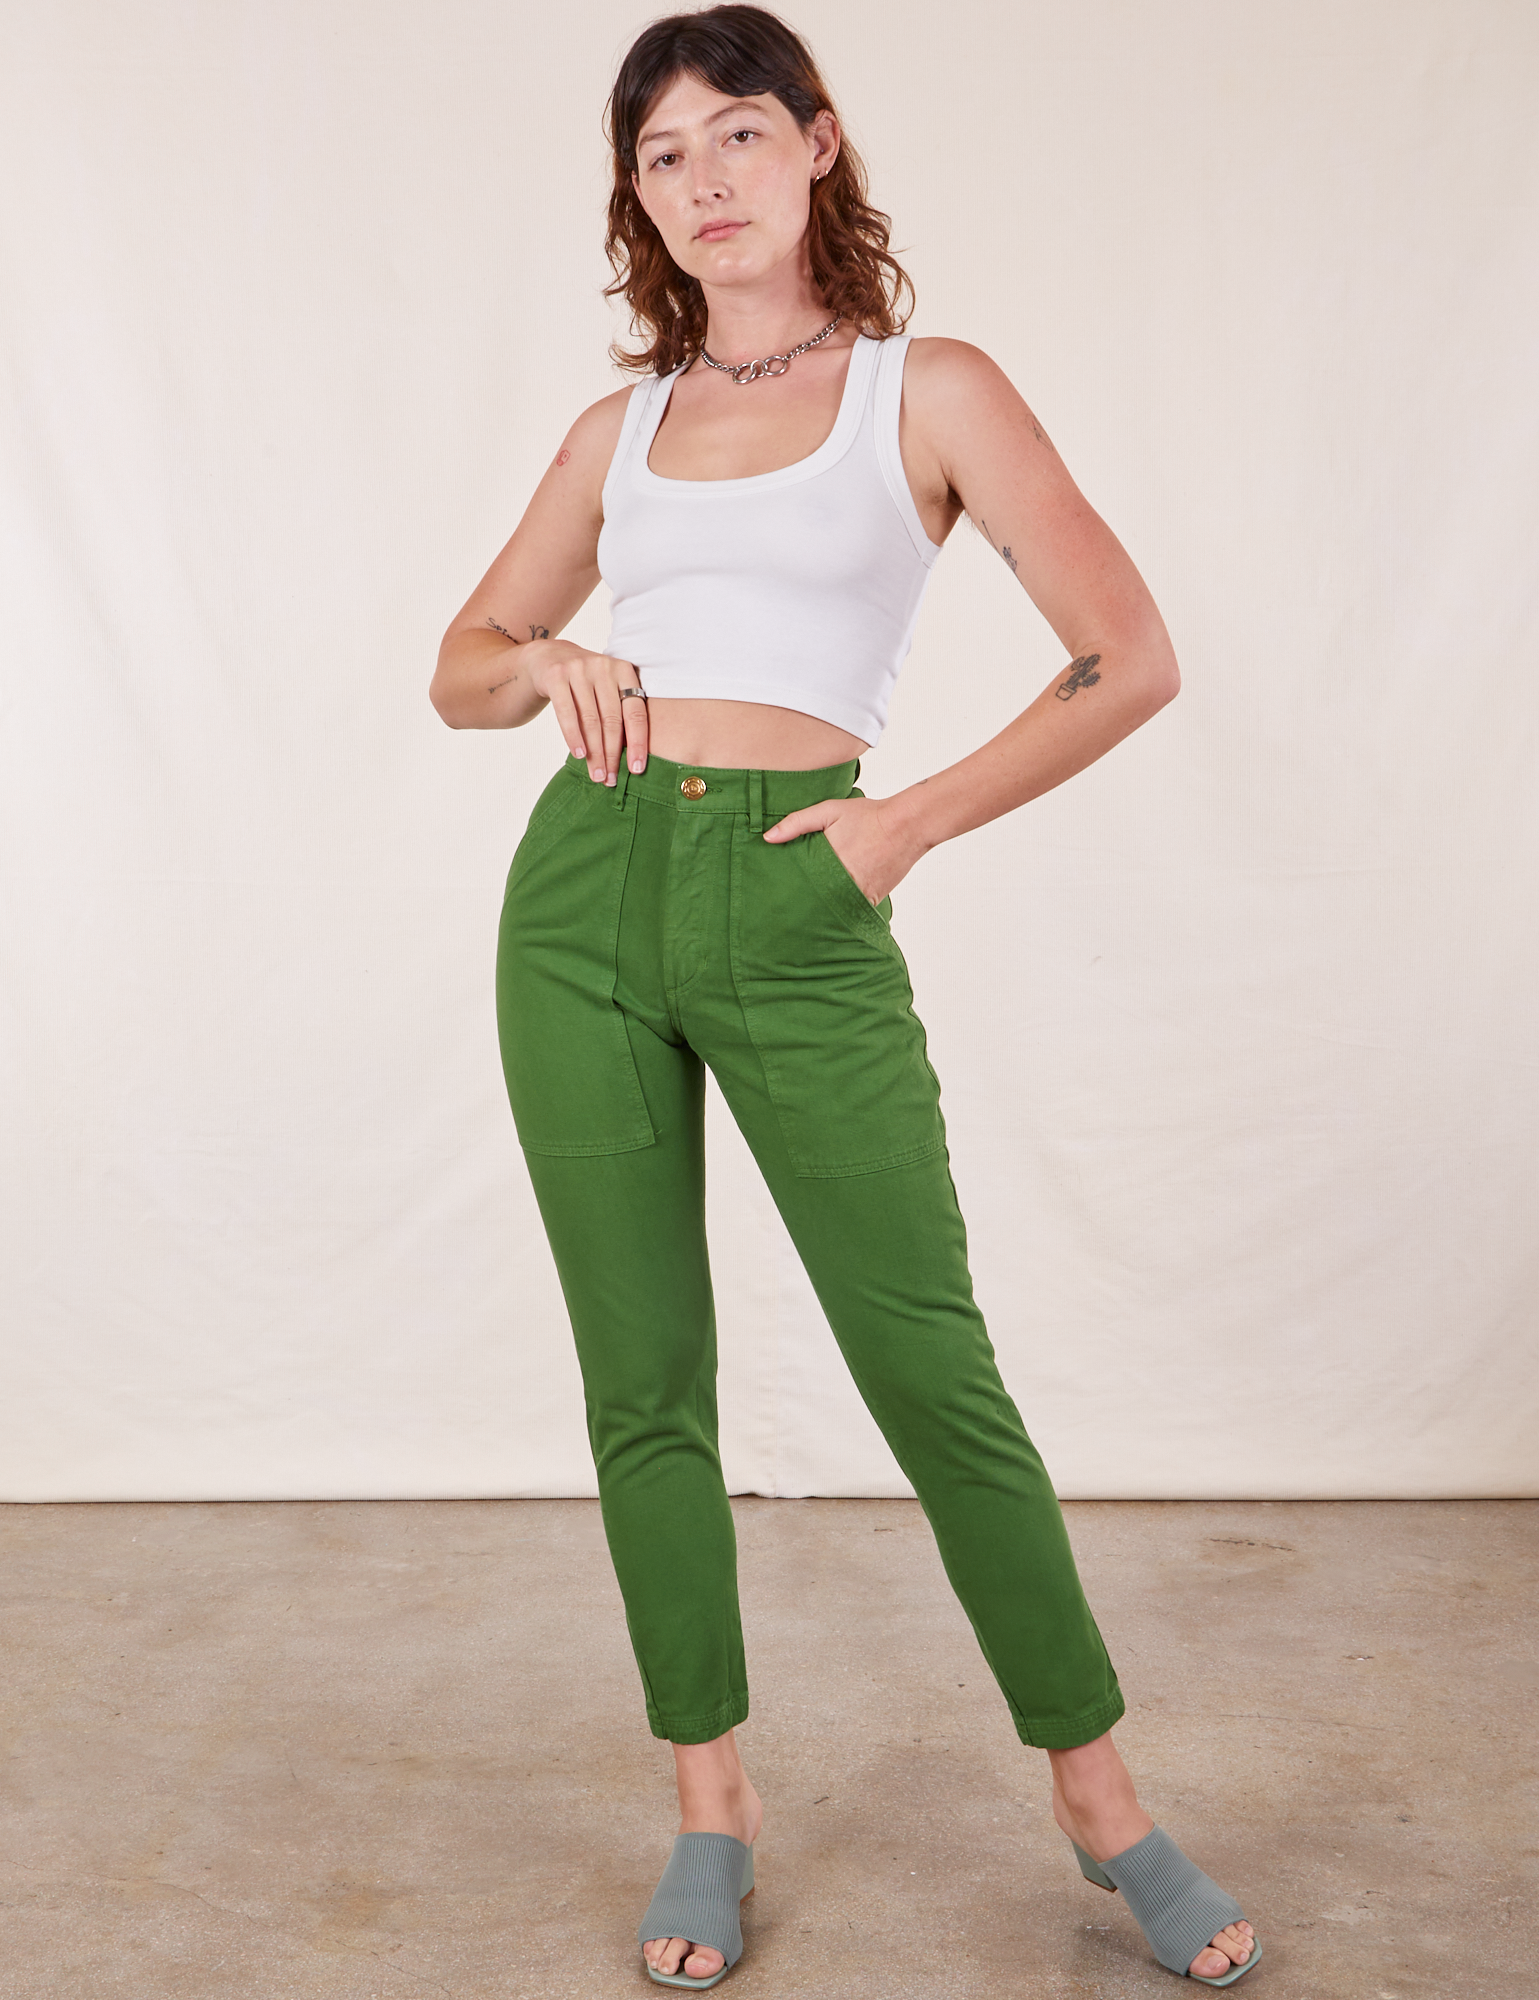 Alex is 5'8" and wearing XXS Pencil Pants in Lawn Green paired with Cropped Tank Top in vintage tee off-white 